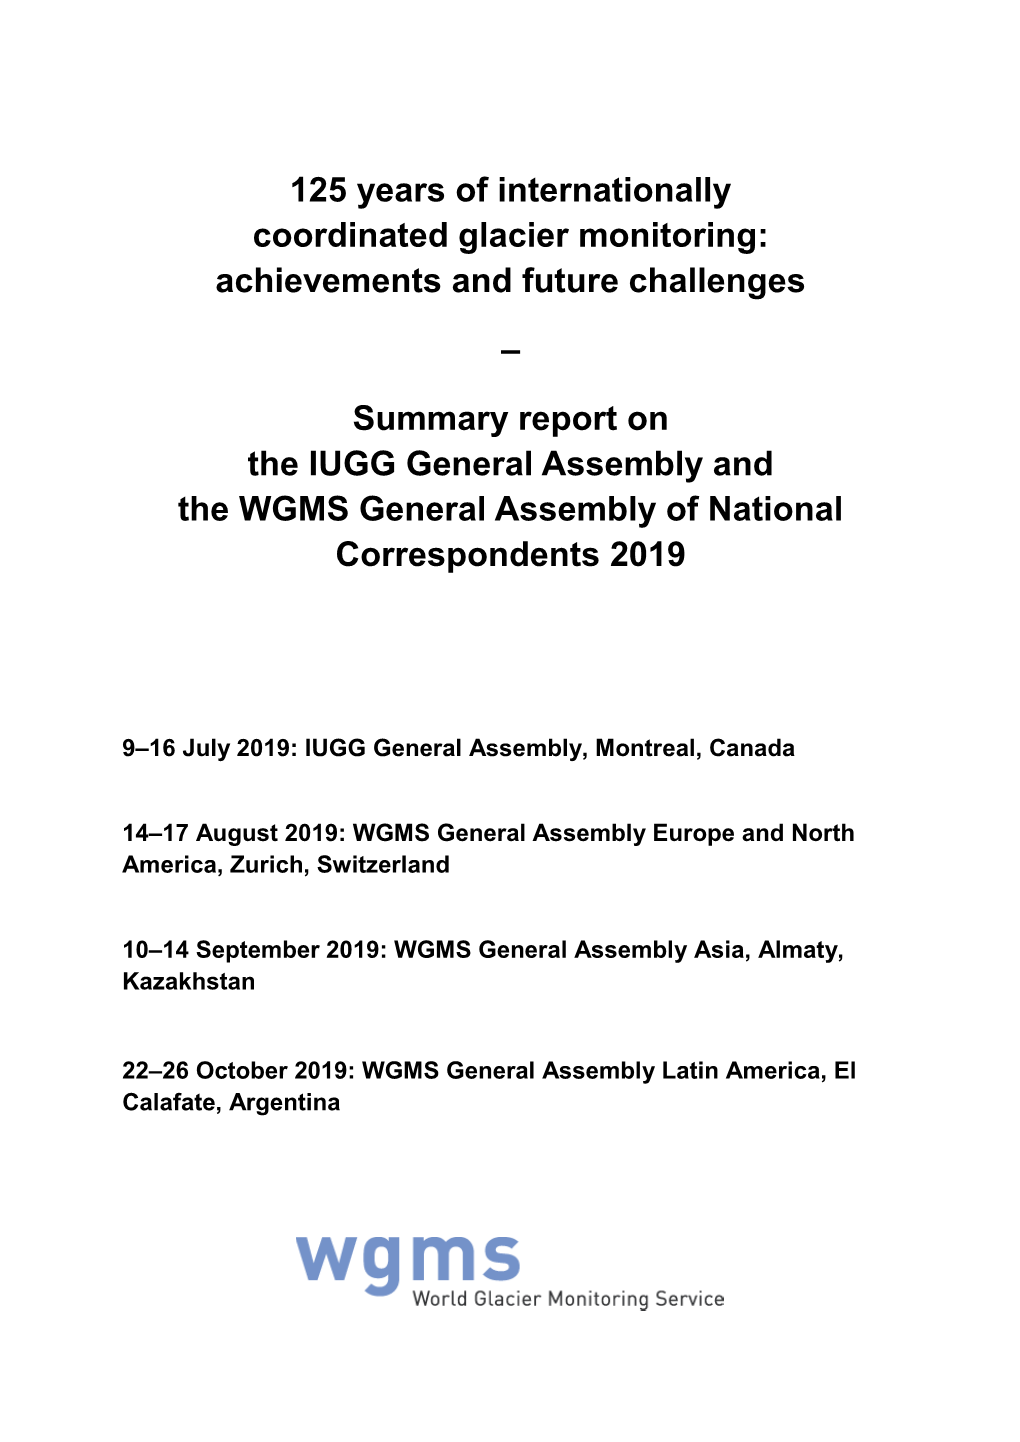 Achievements and Future Challenges – Summary Report on the IUGG General Assembly and the WGMS General Assembly of National Correspondents 2019